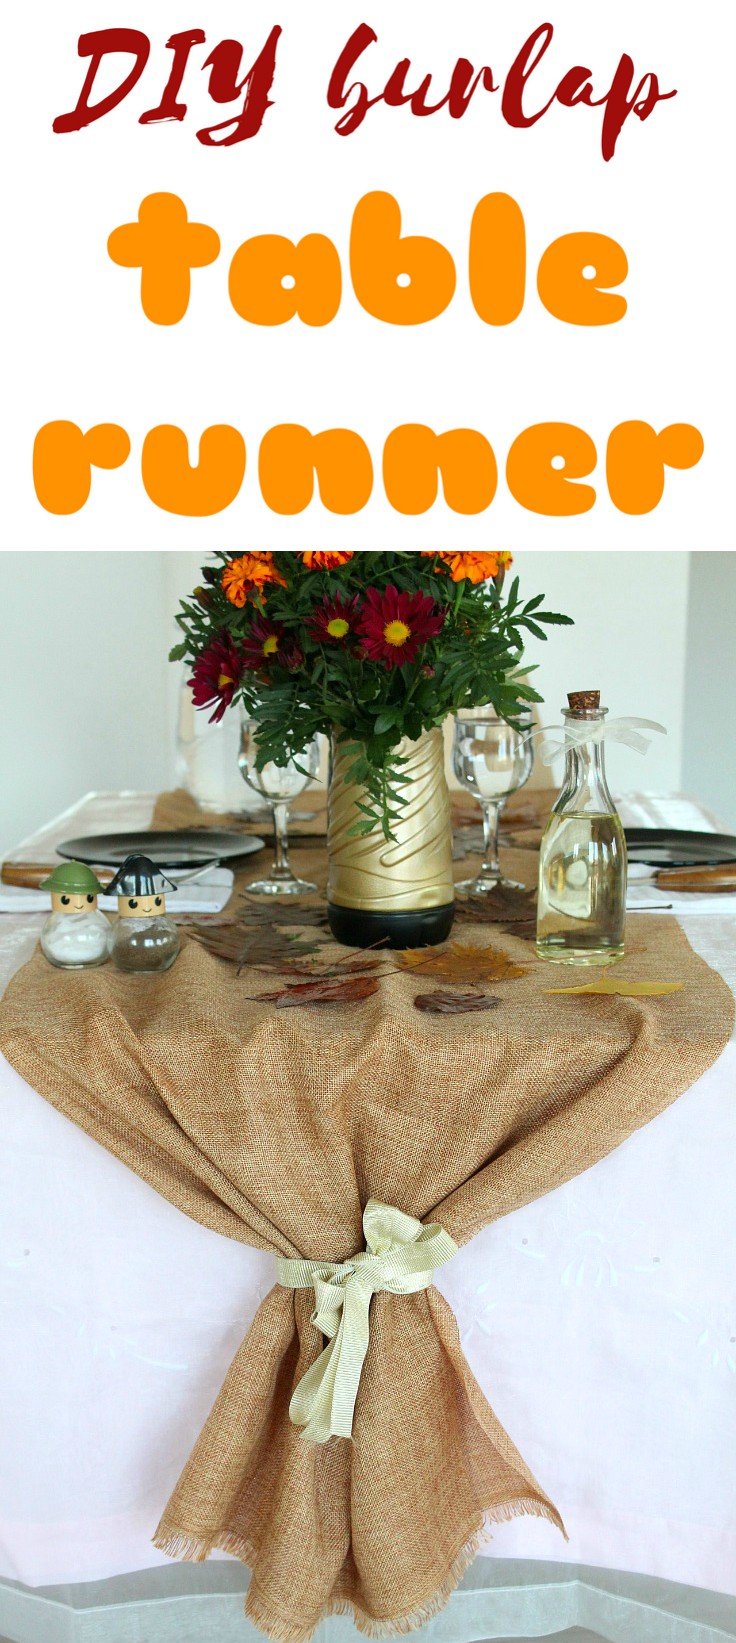 If you're looking for an affordable table runner for the upcoming entertaining season, you might wanna consider making this jute table runner! Its super easy & quick, made from burlap and ribbon.